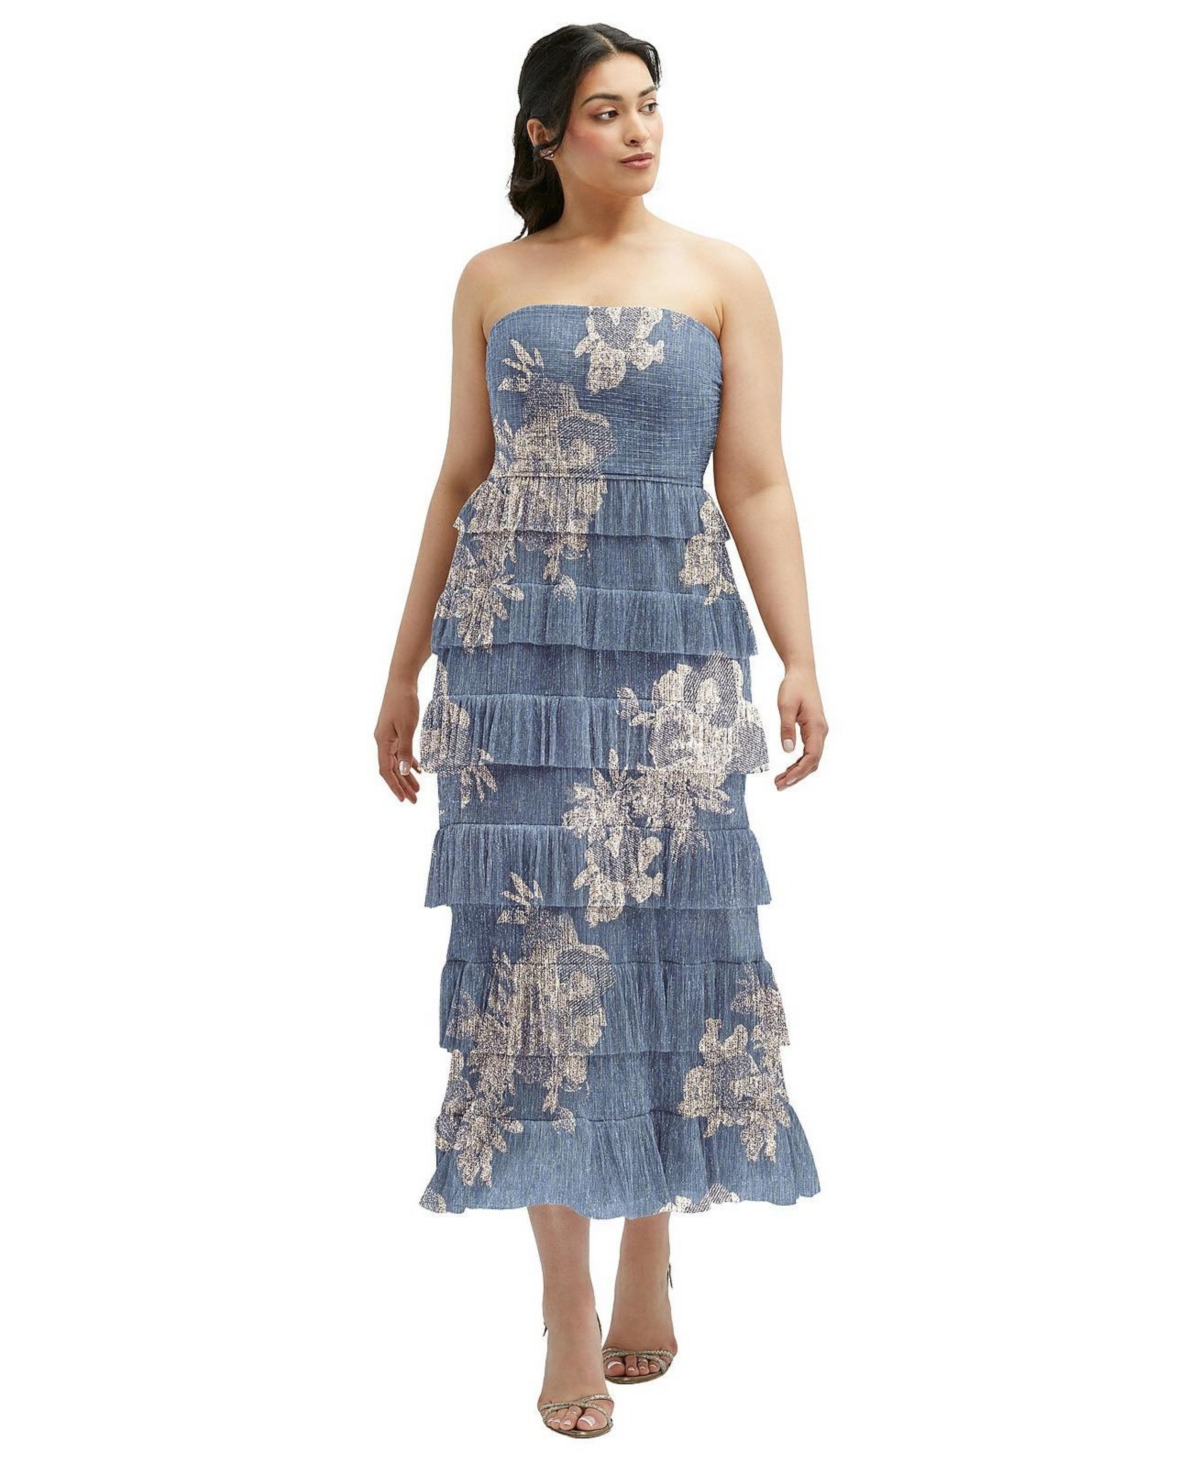 Women's Ruffle Tiered Skirt Metallic Pleated Strapless Midi Dress with Floral Gold Foil Print - French blue gold foil